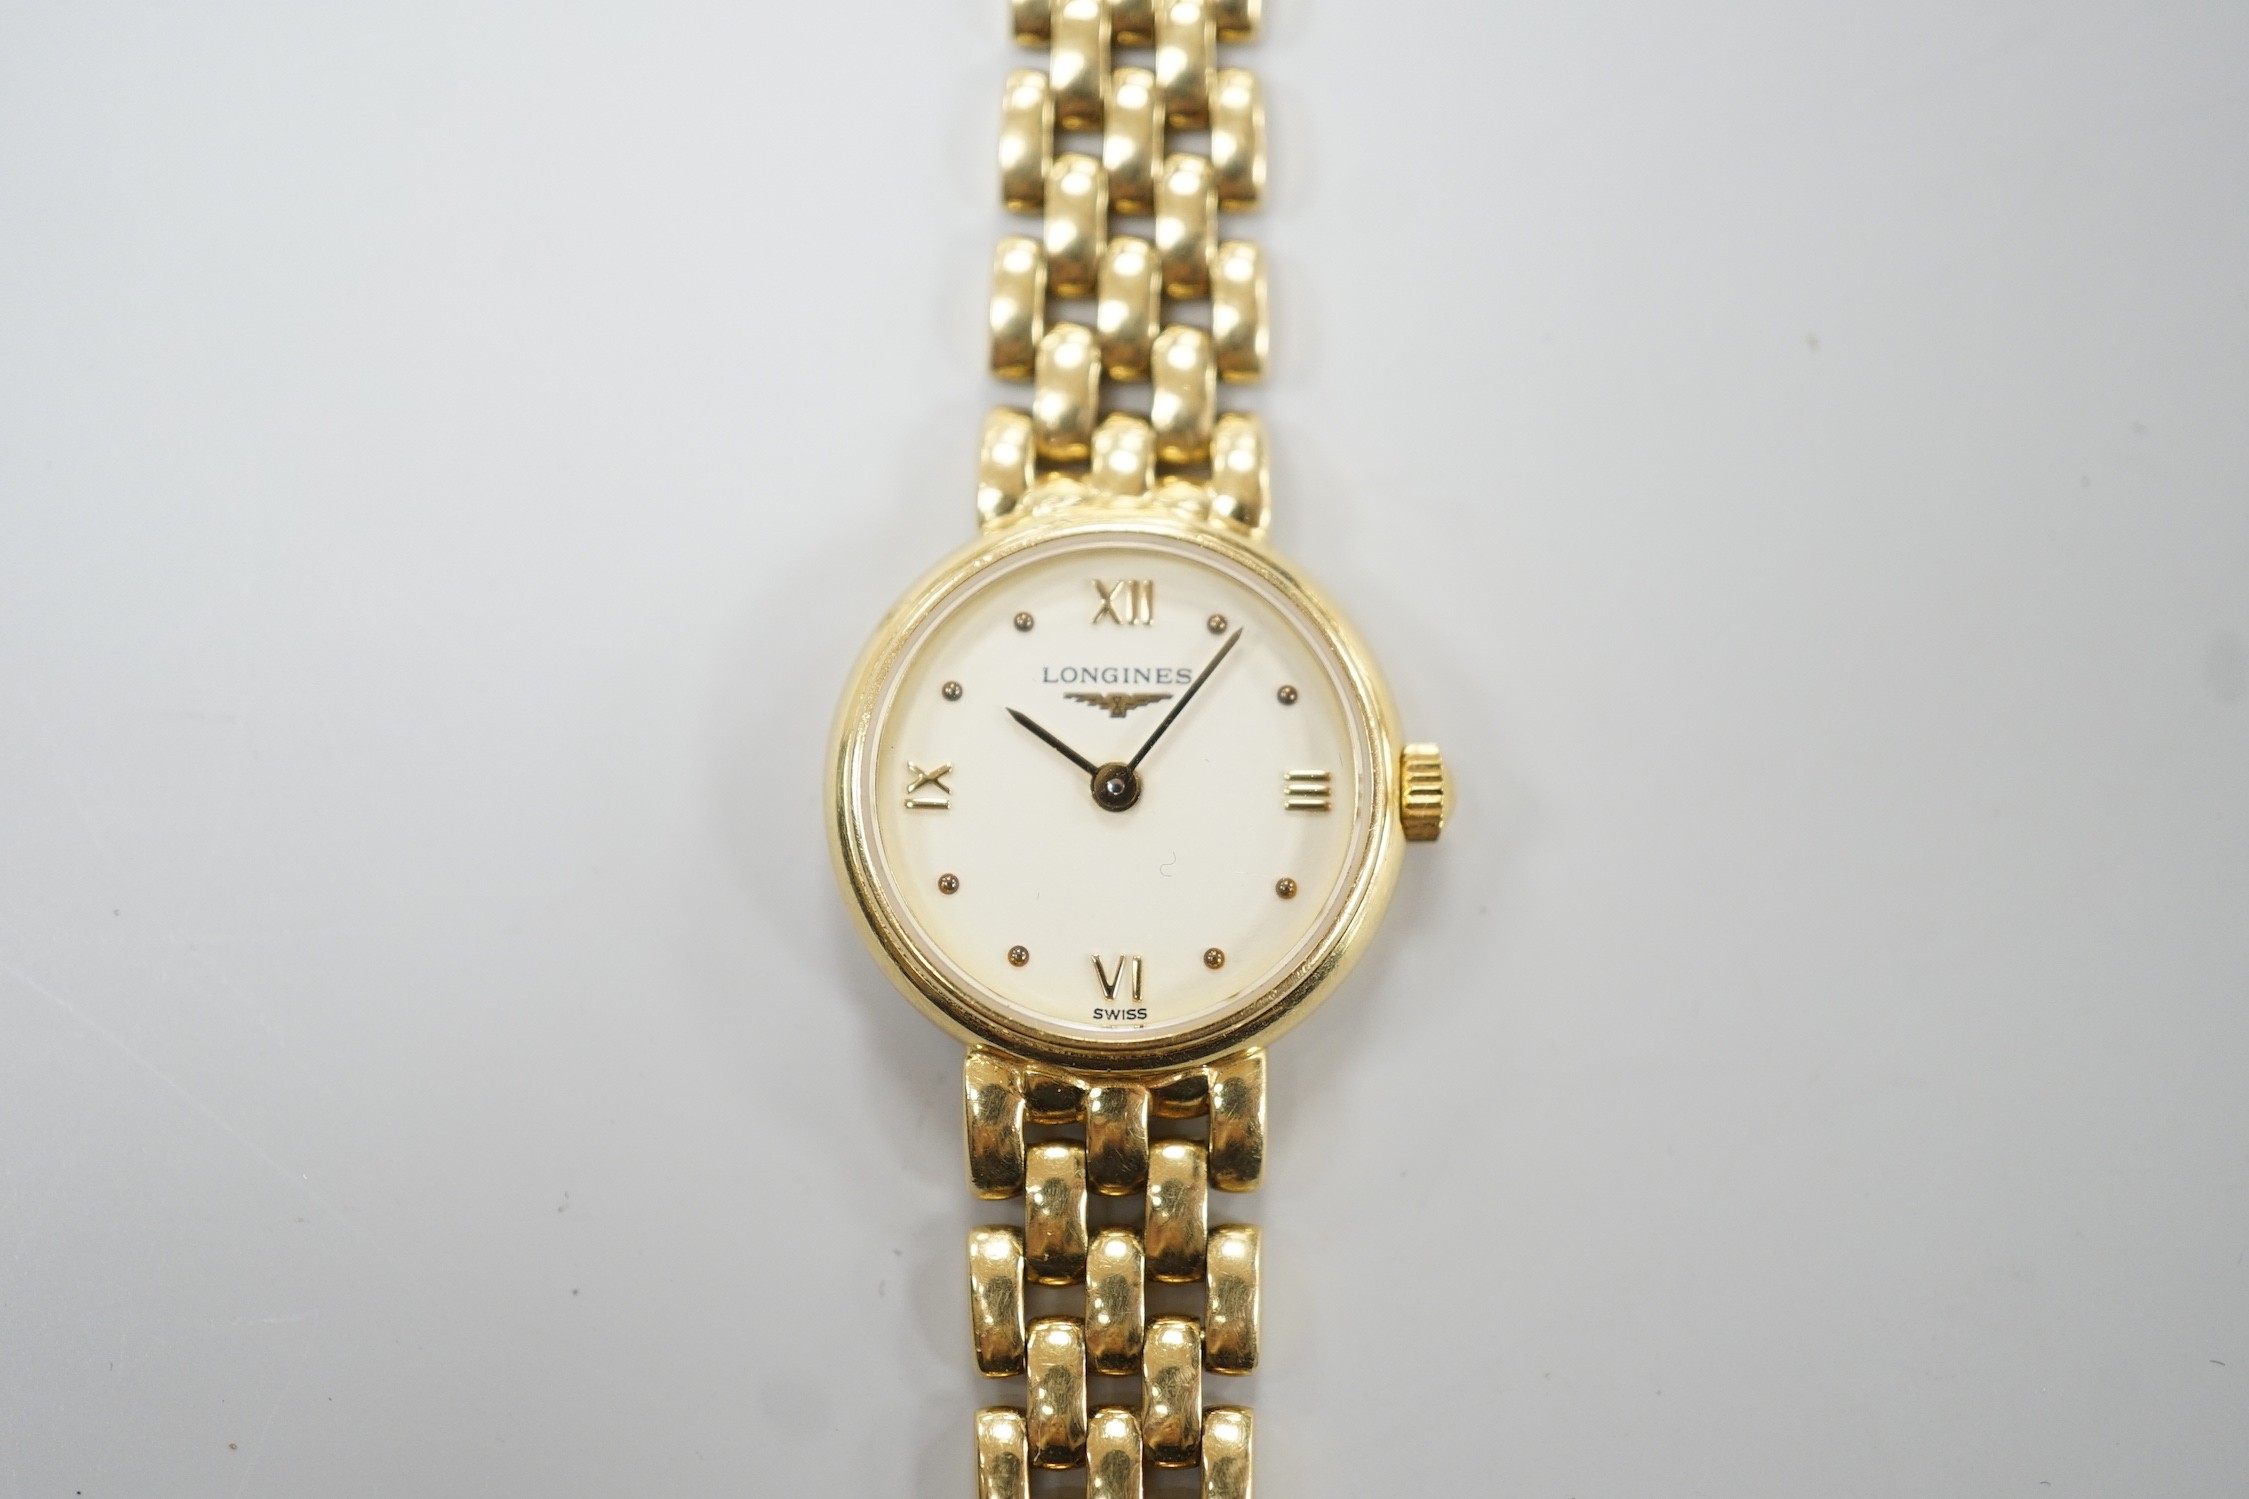 A lady's 2001 18ct gold Longines quartz wrist watch, on an 18ct gold Longines bracelet, overall length 18cm, gross weight 29.2 grams, with box and papers.